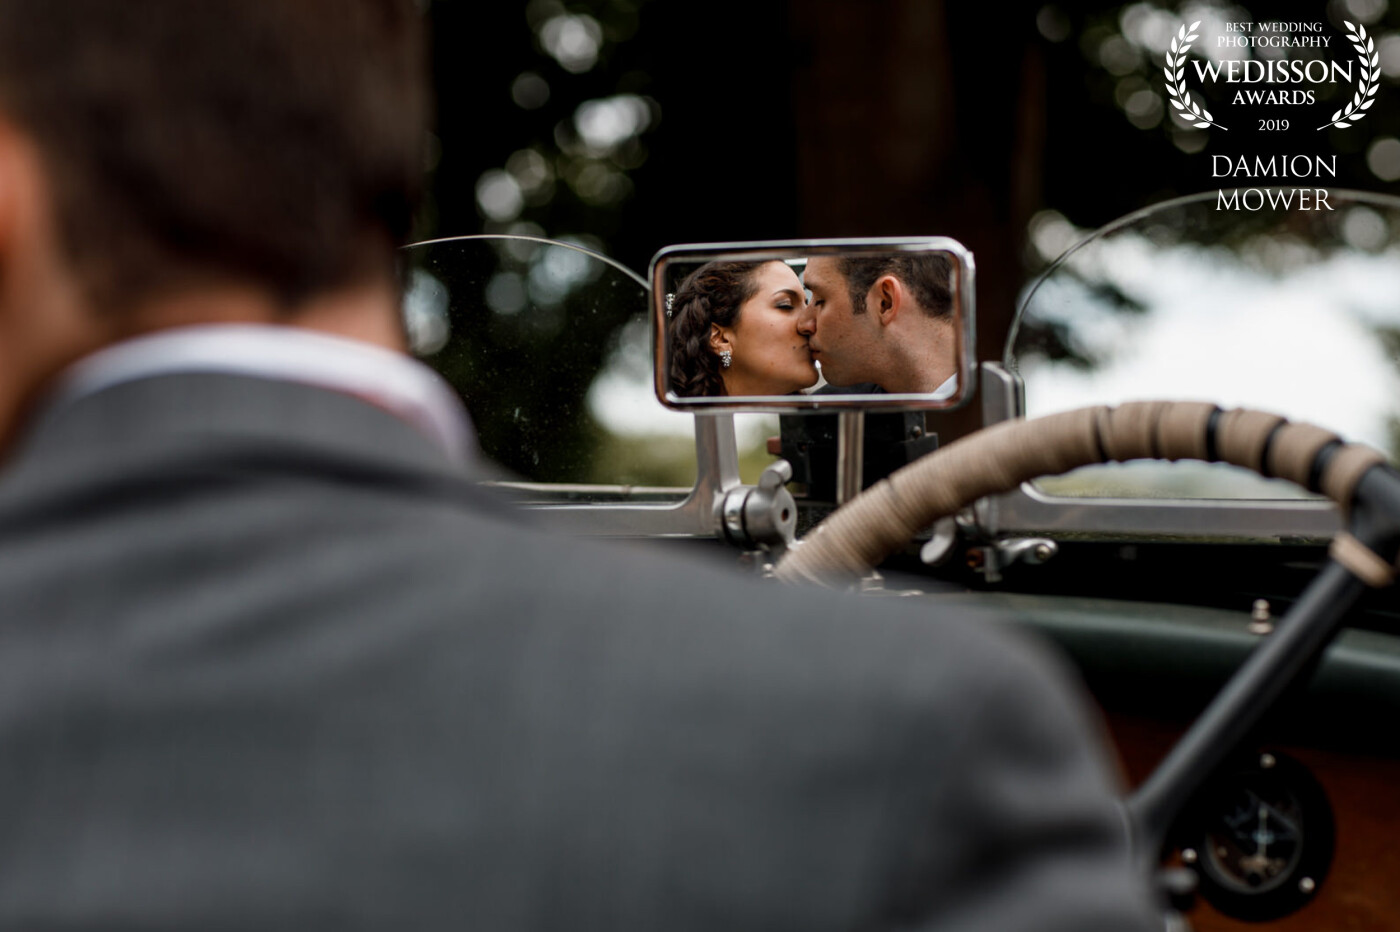 Thank you for the award. This was taken outside Pembroke lodge in Tat and David's vintage car as they were stealing a quiet kiss before going to their reception